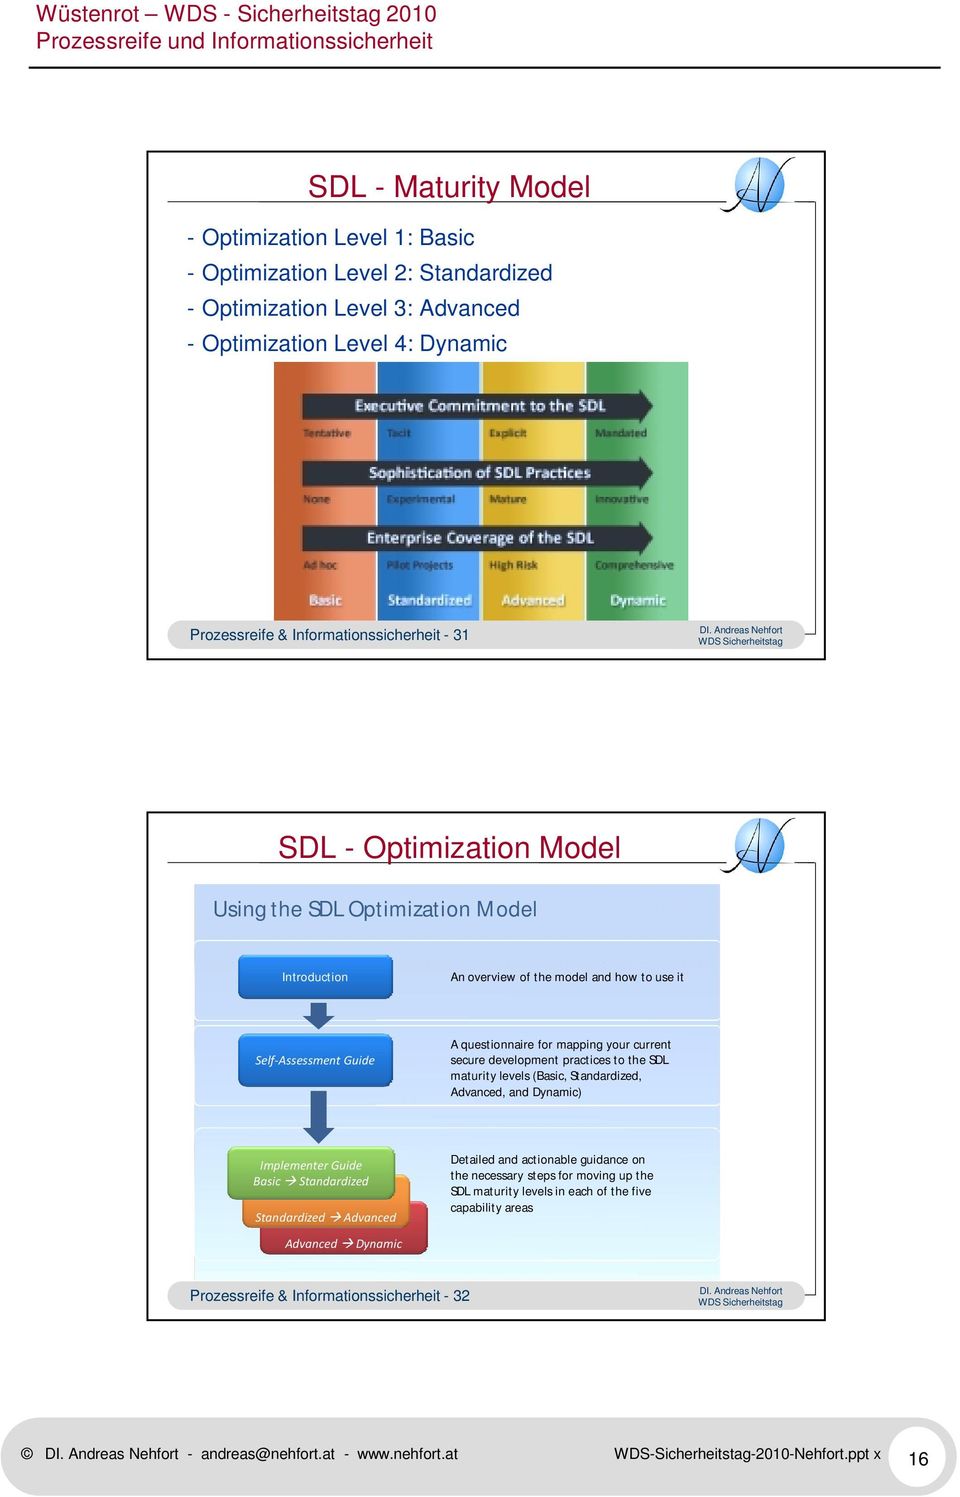 practices to the SDL maturity levels (Basic, Standardized, Advanced, and Dynamic) Implementer Guide Basic Standardized Standardized Advanced Advanced Dynamic Detailed and actionable guidance on the